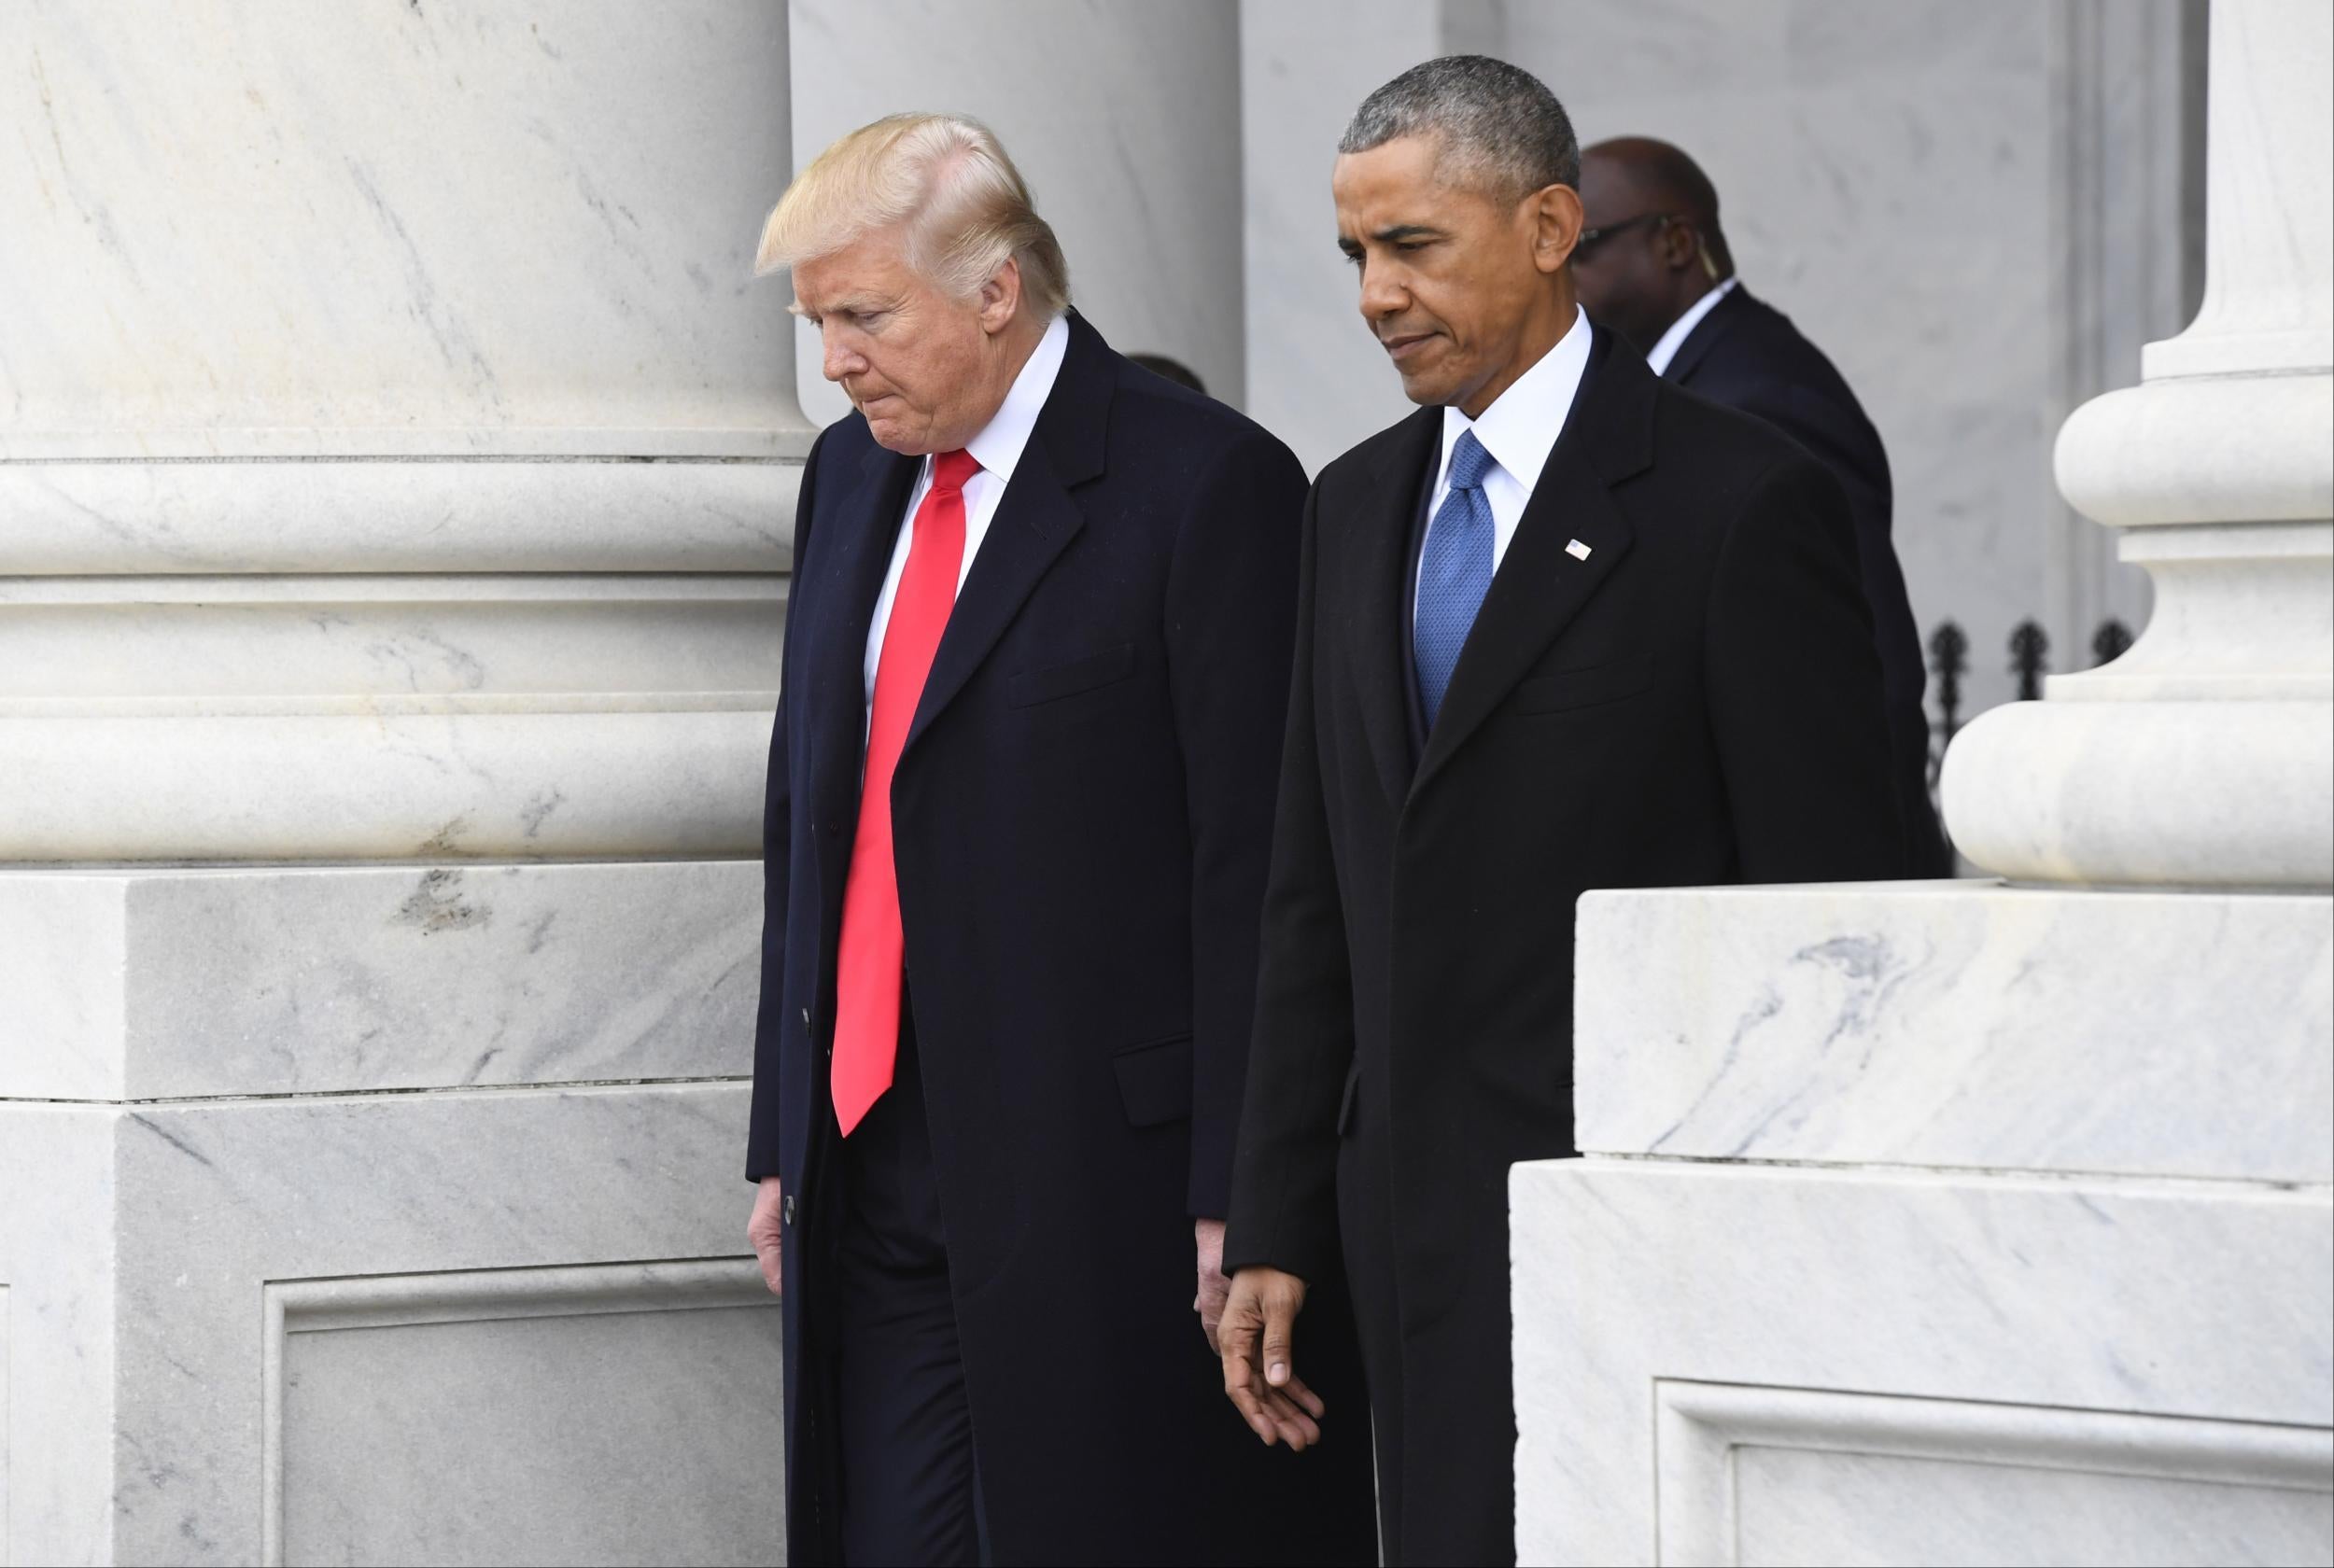 President Donald Trump and former President Barack Obama walk out prior to Obama's departure during the 2017 presidential inauguration